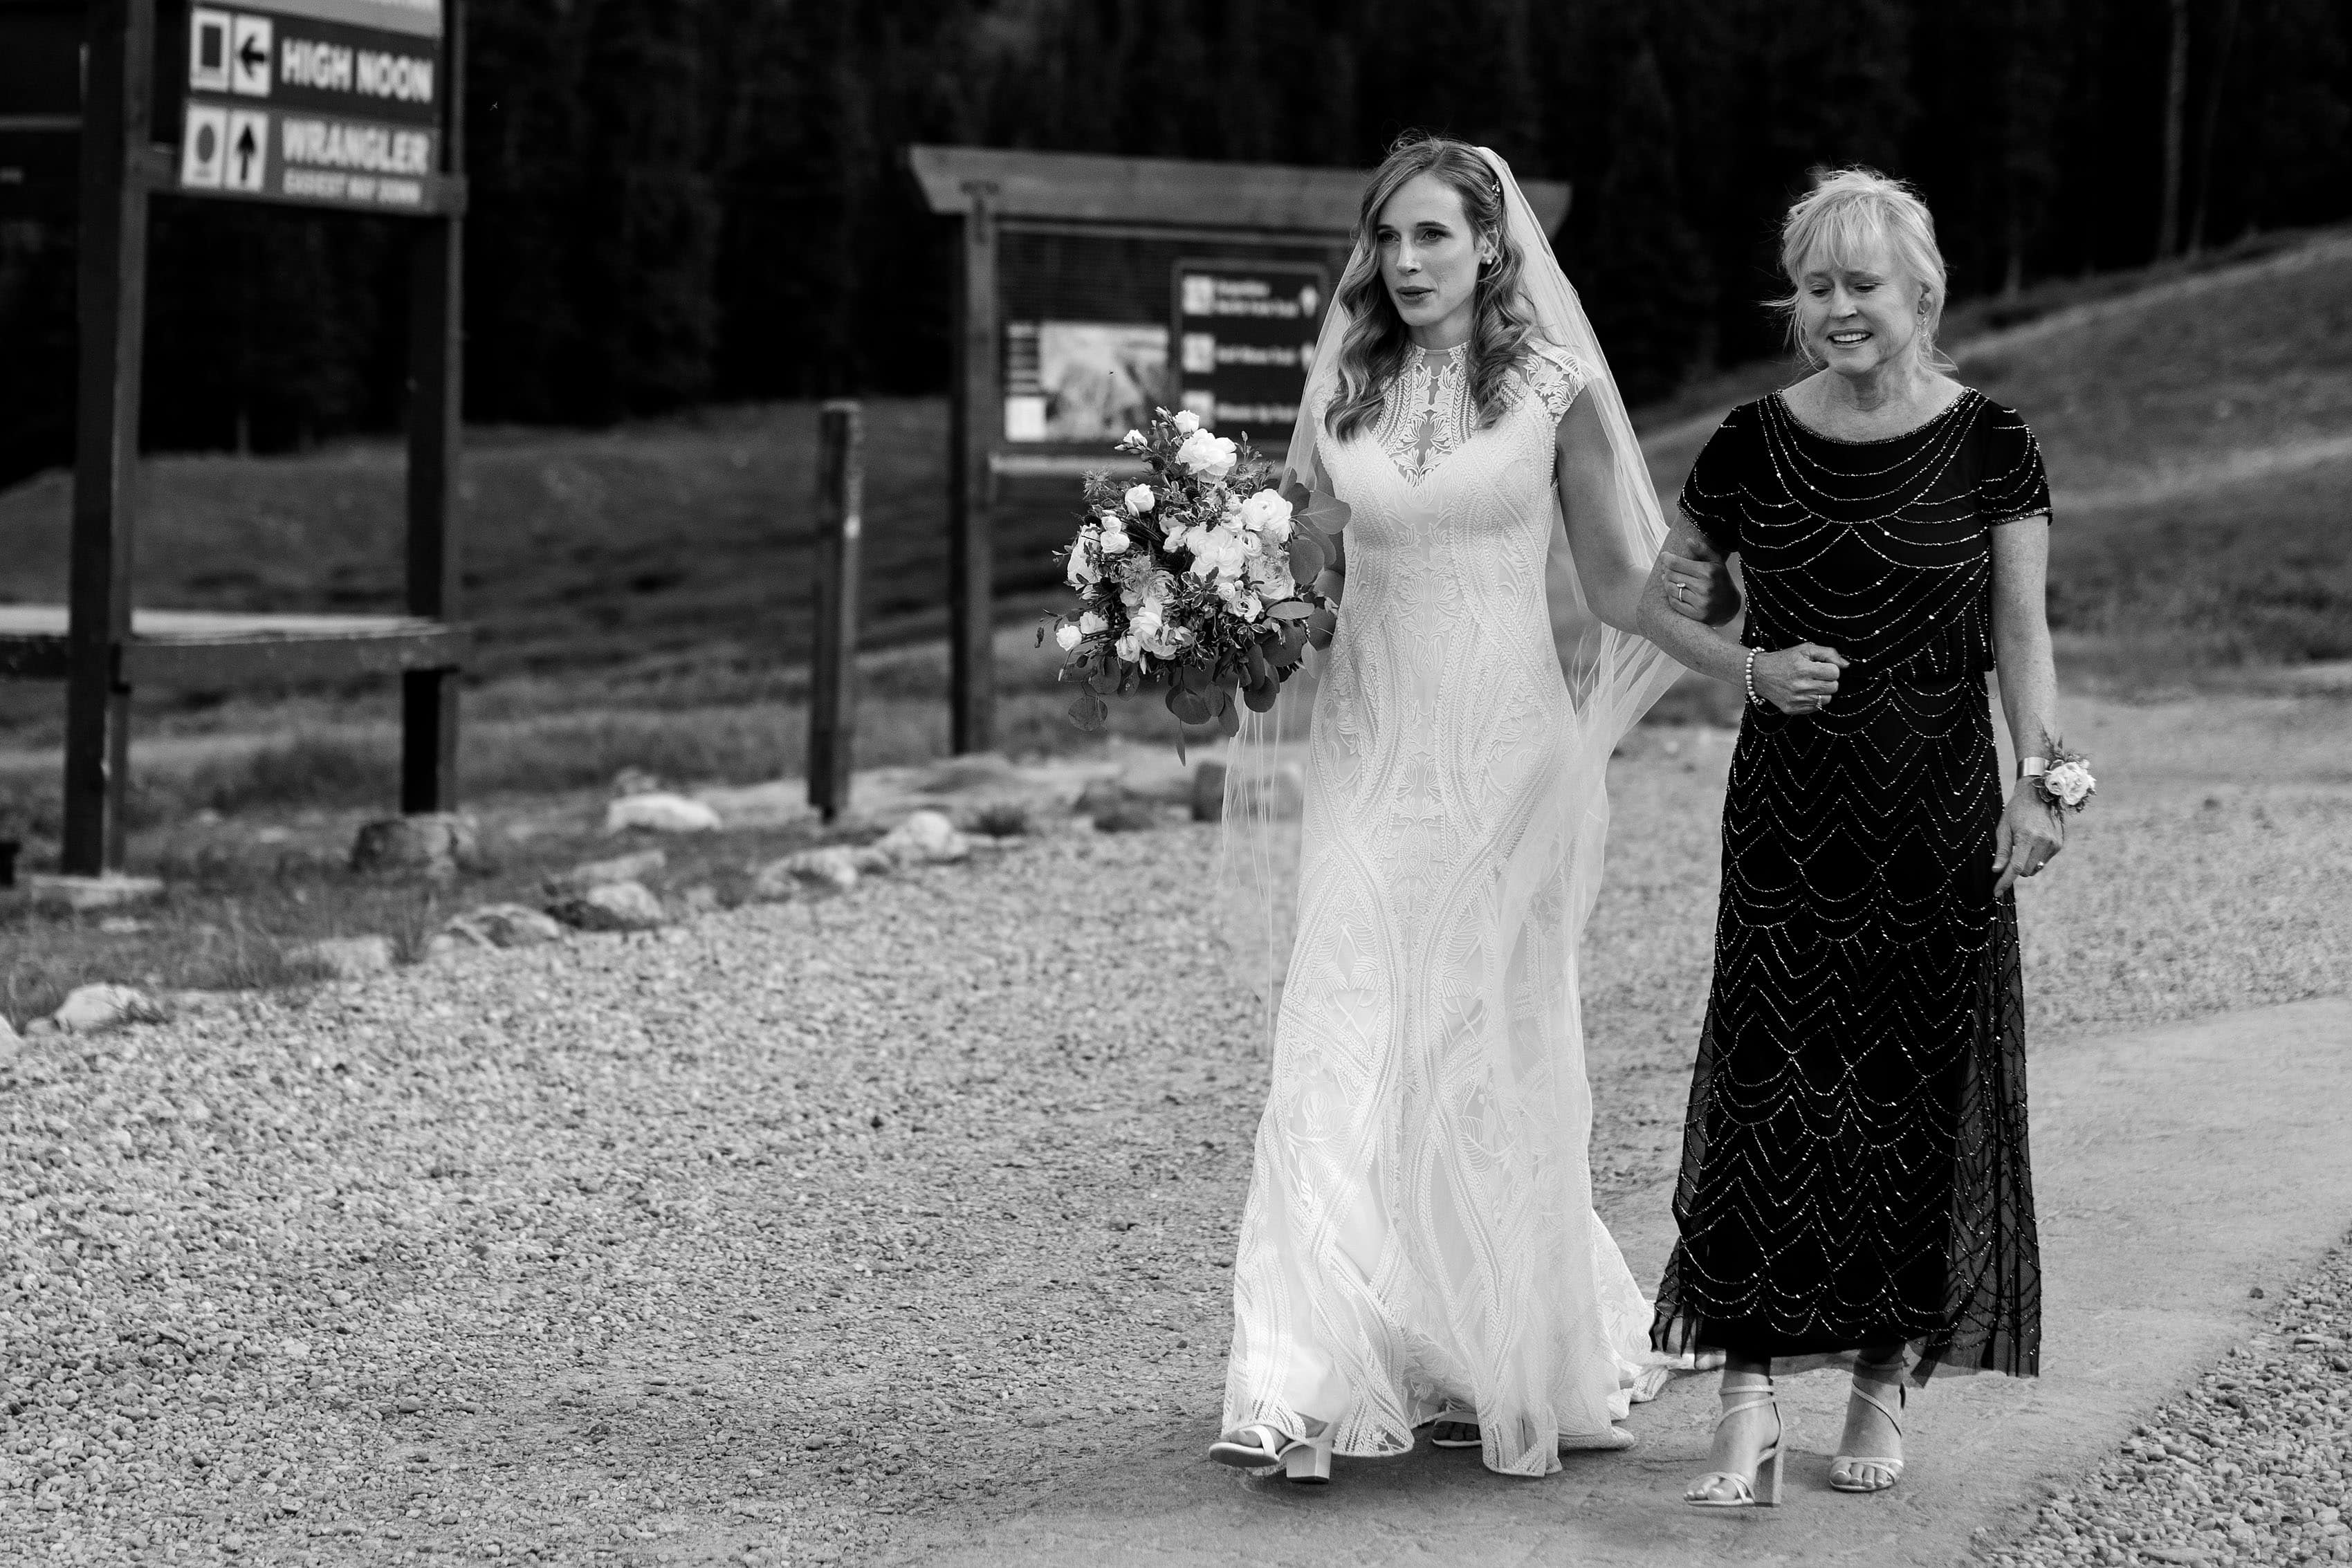 The bride exhales while walking down a path to the ceremony